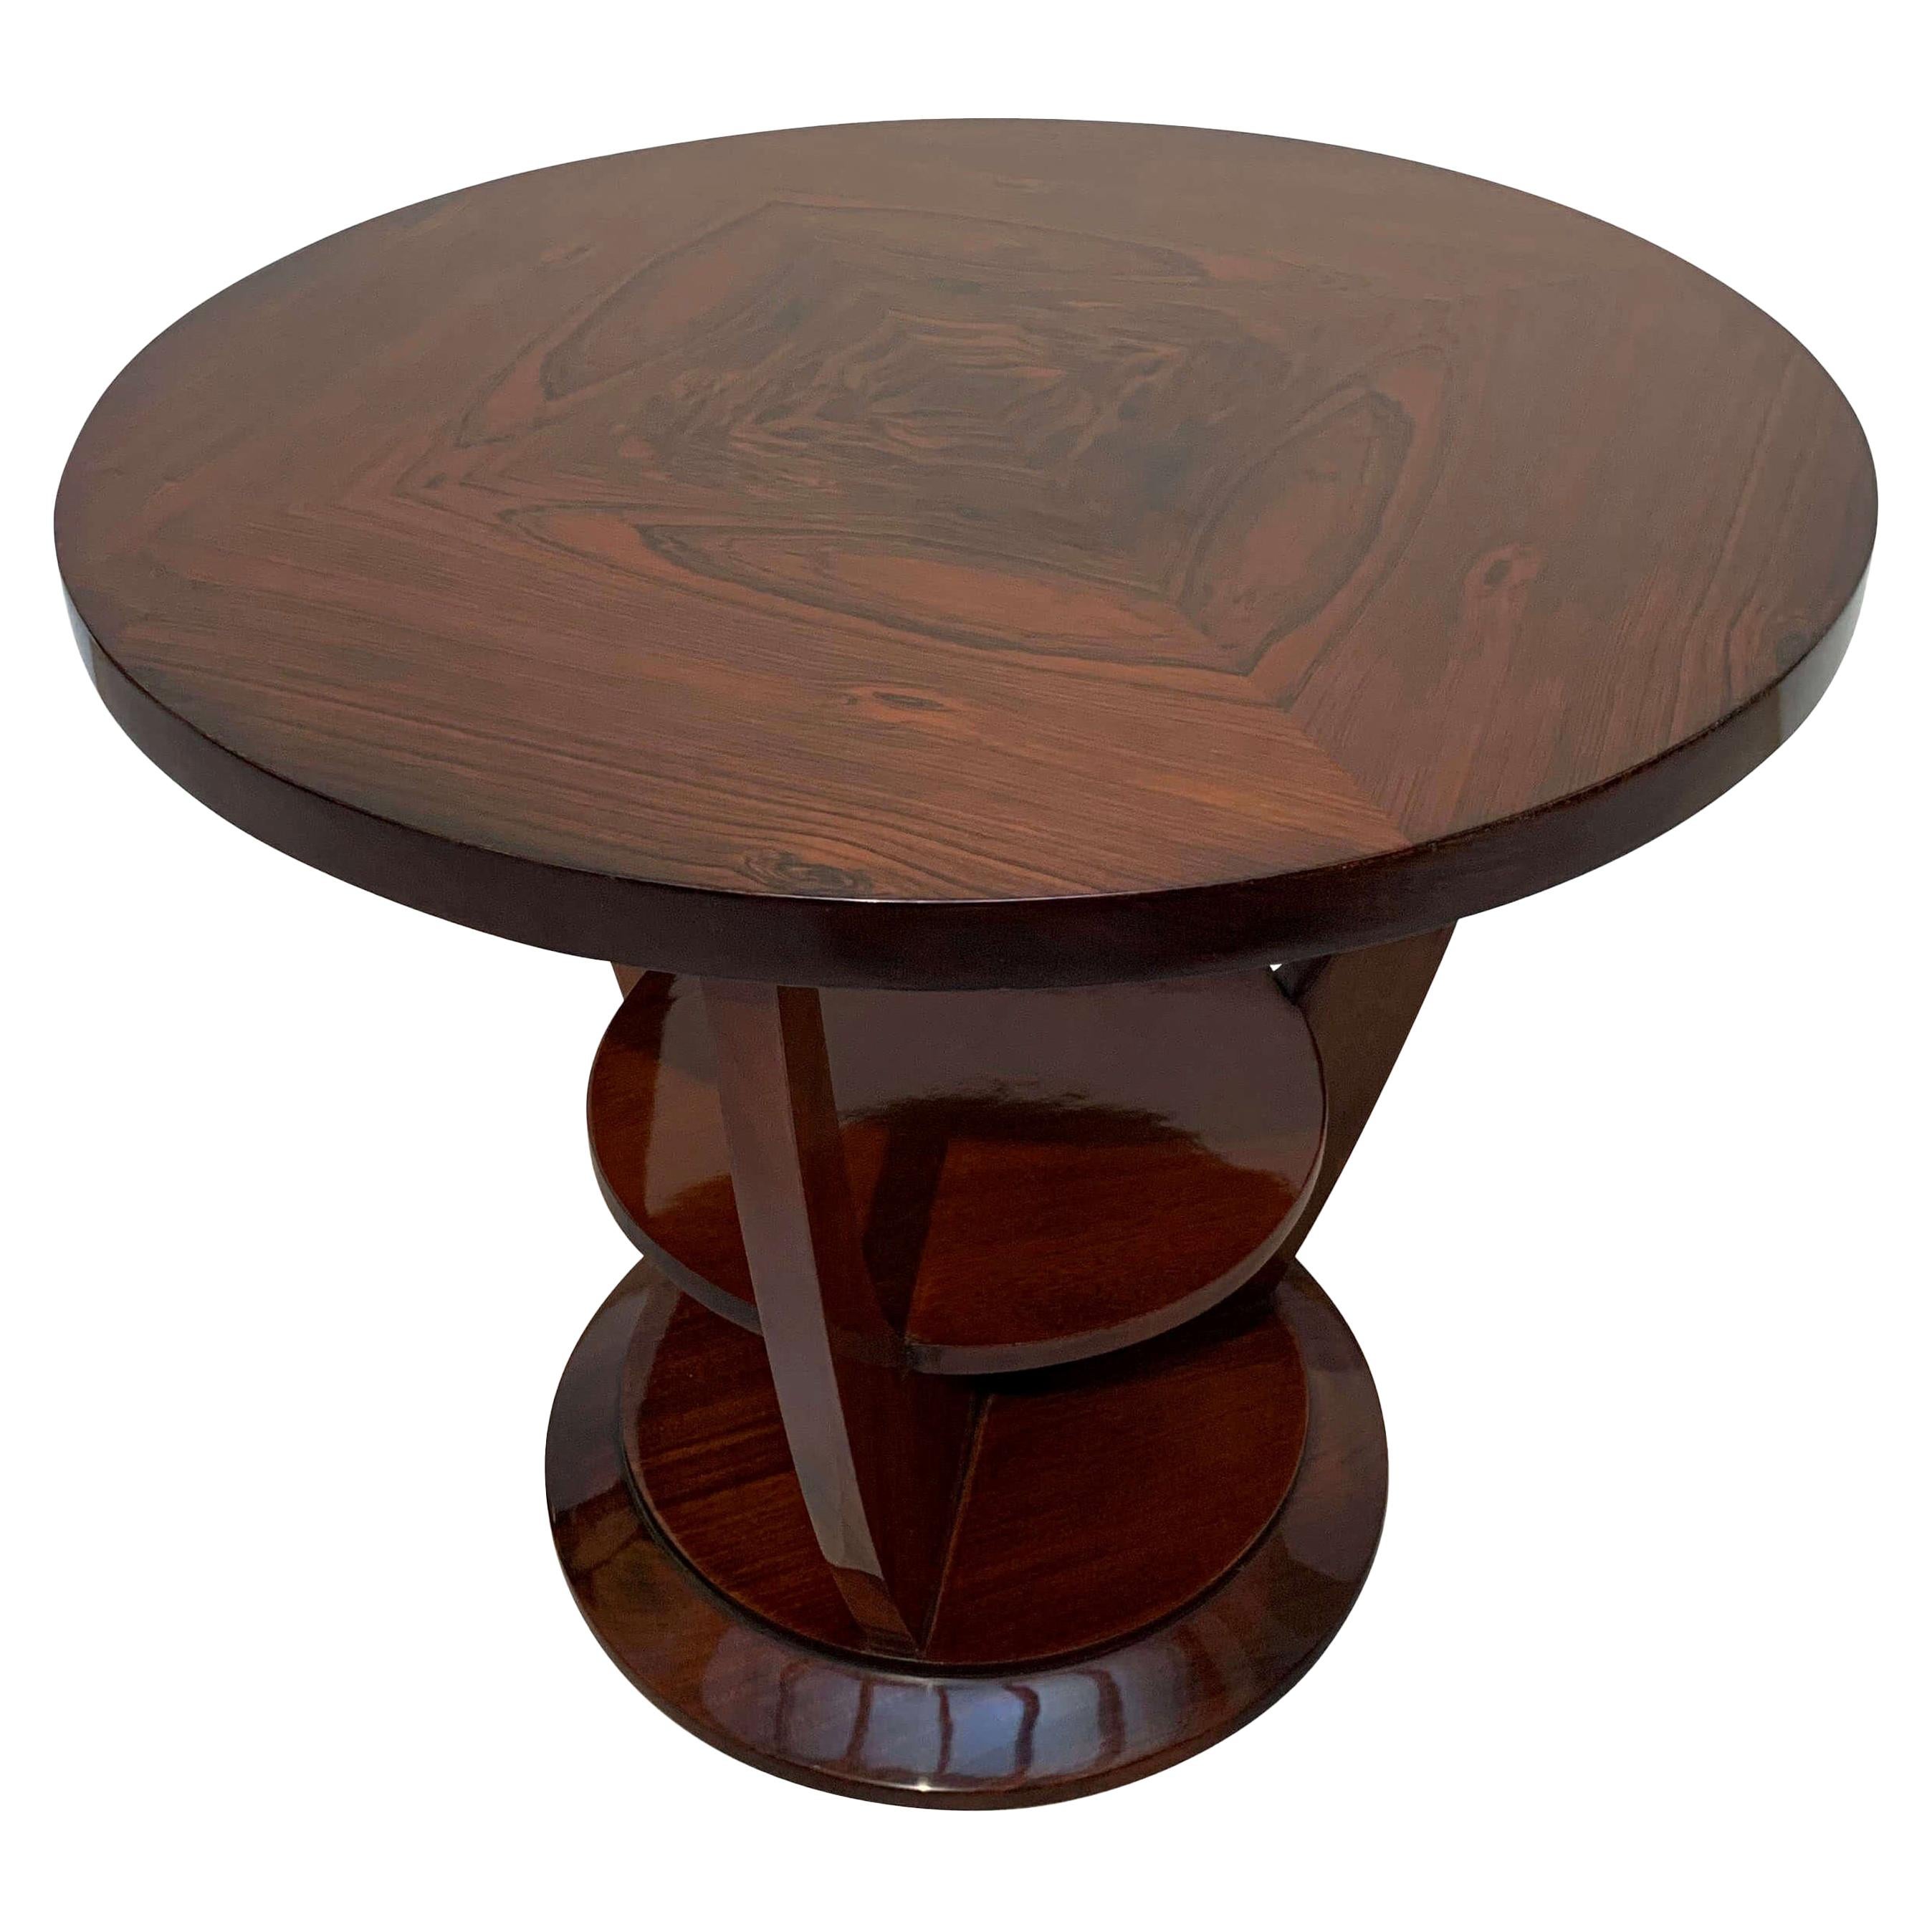 Round Art Deco Side Table, Palisander, Signed, French Polish, France, circa 1925